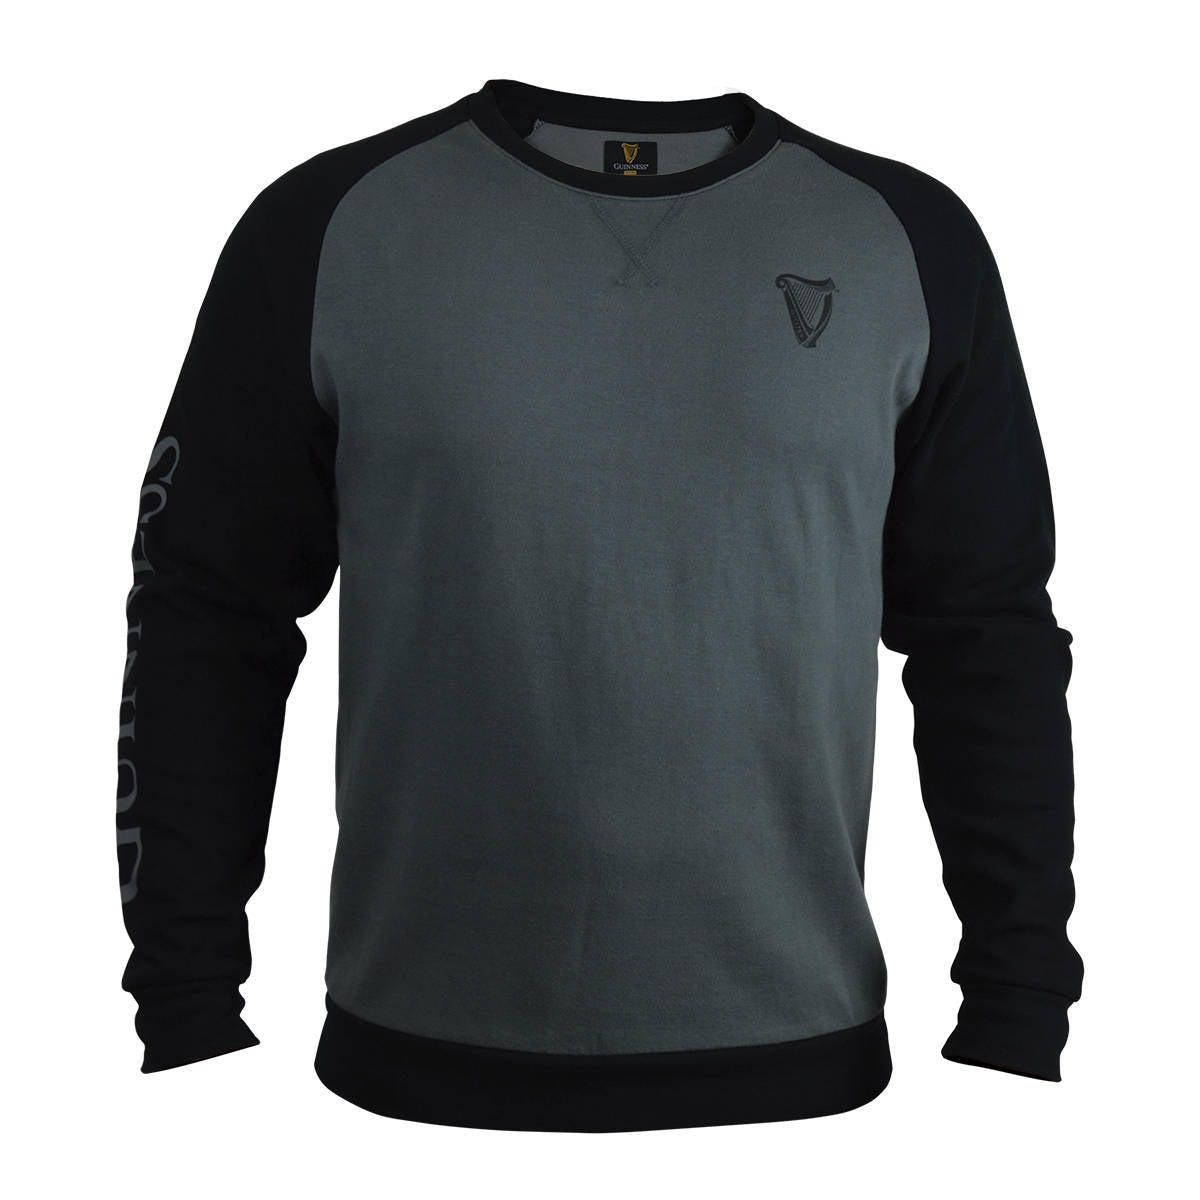 A mid-weight unisex Guinness Long Sleeve Sweater with the Irish flag on it.